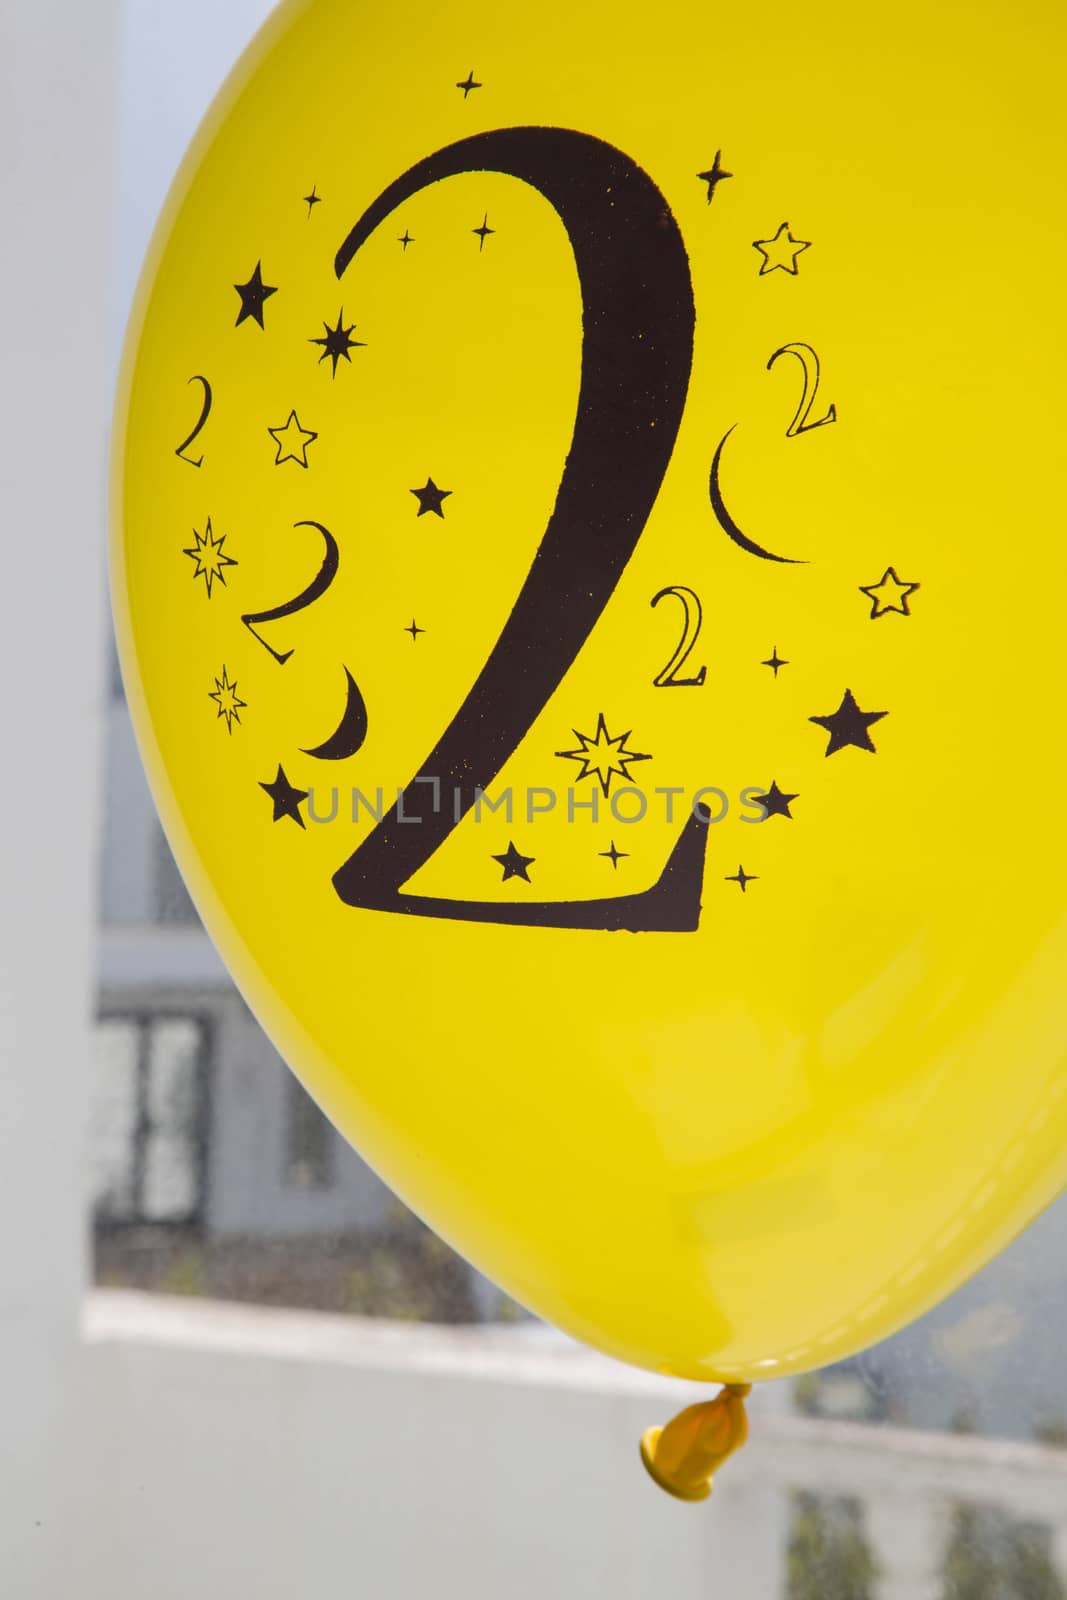 Number two printed in black on the yellow balloon